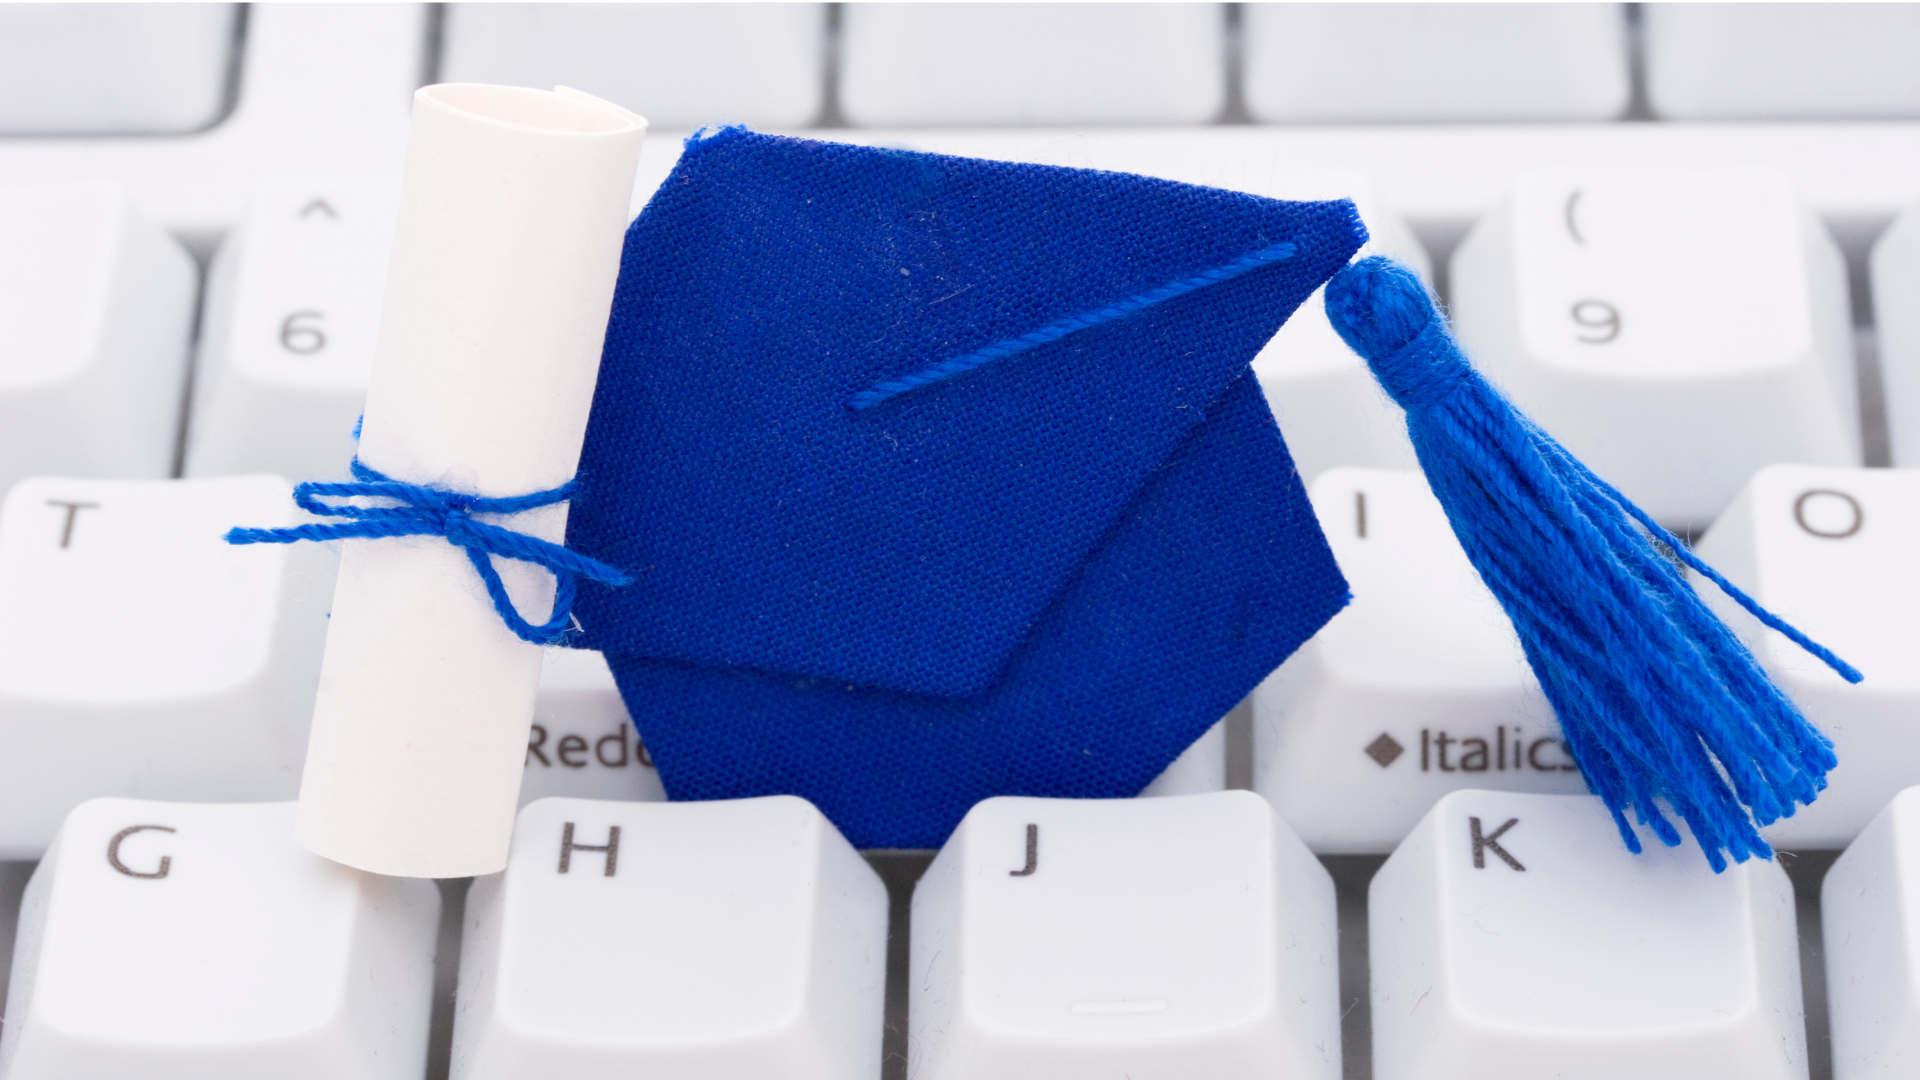 Easiest Online Certificate Programs - featured image of graduation cap and keyboard